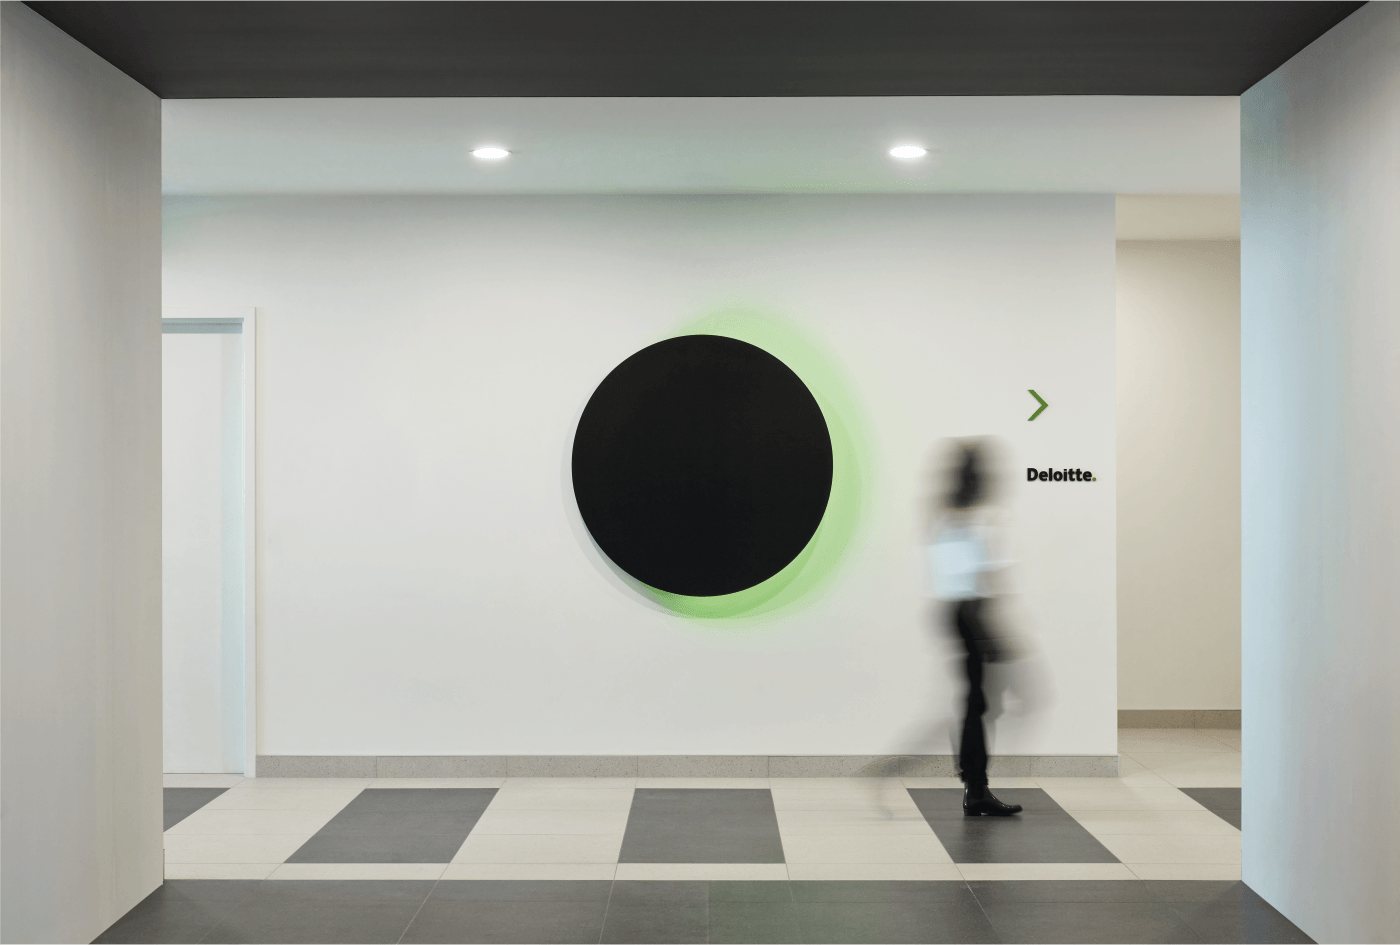 environmental graphics wayfinding Space Branding environmental branding Super Graphics deloitte Signage artwork collage Mural